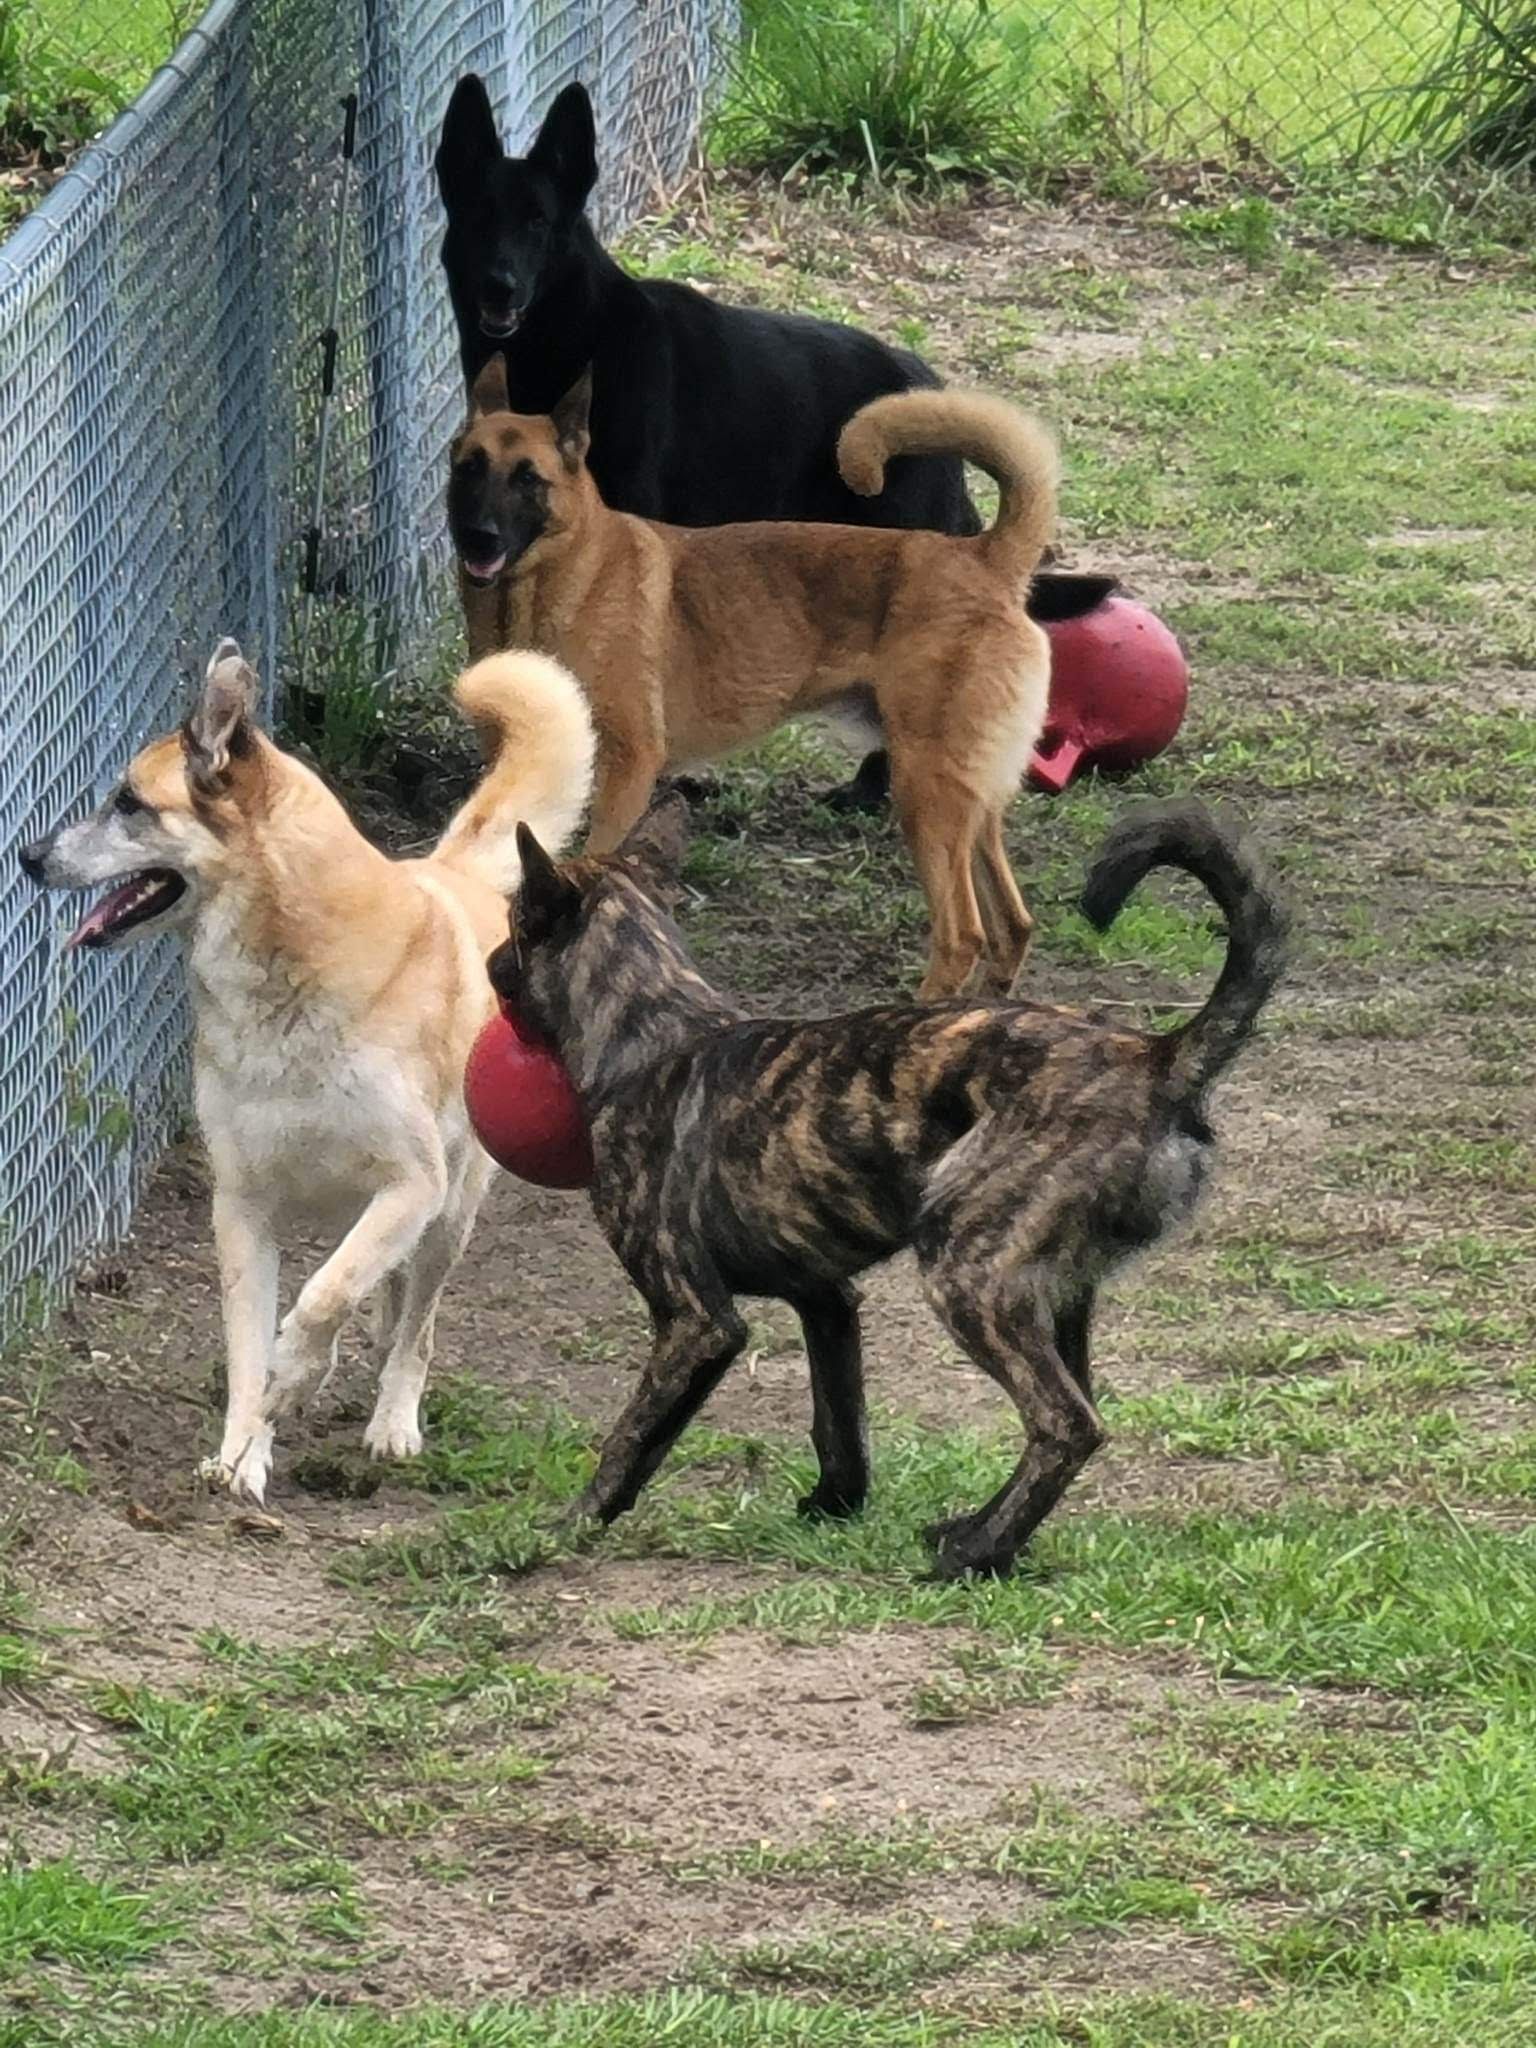 A group of dogs are playing in a grassy area next to a chain link fence.